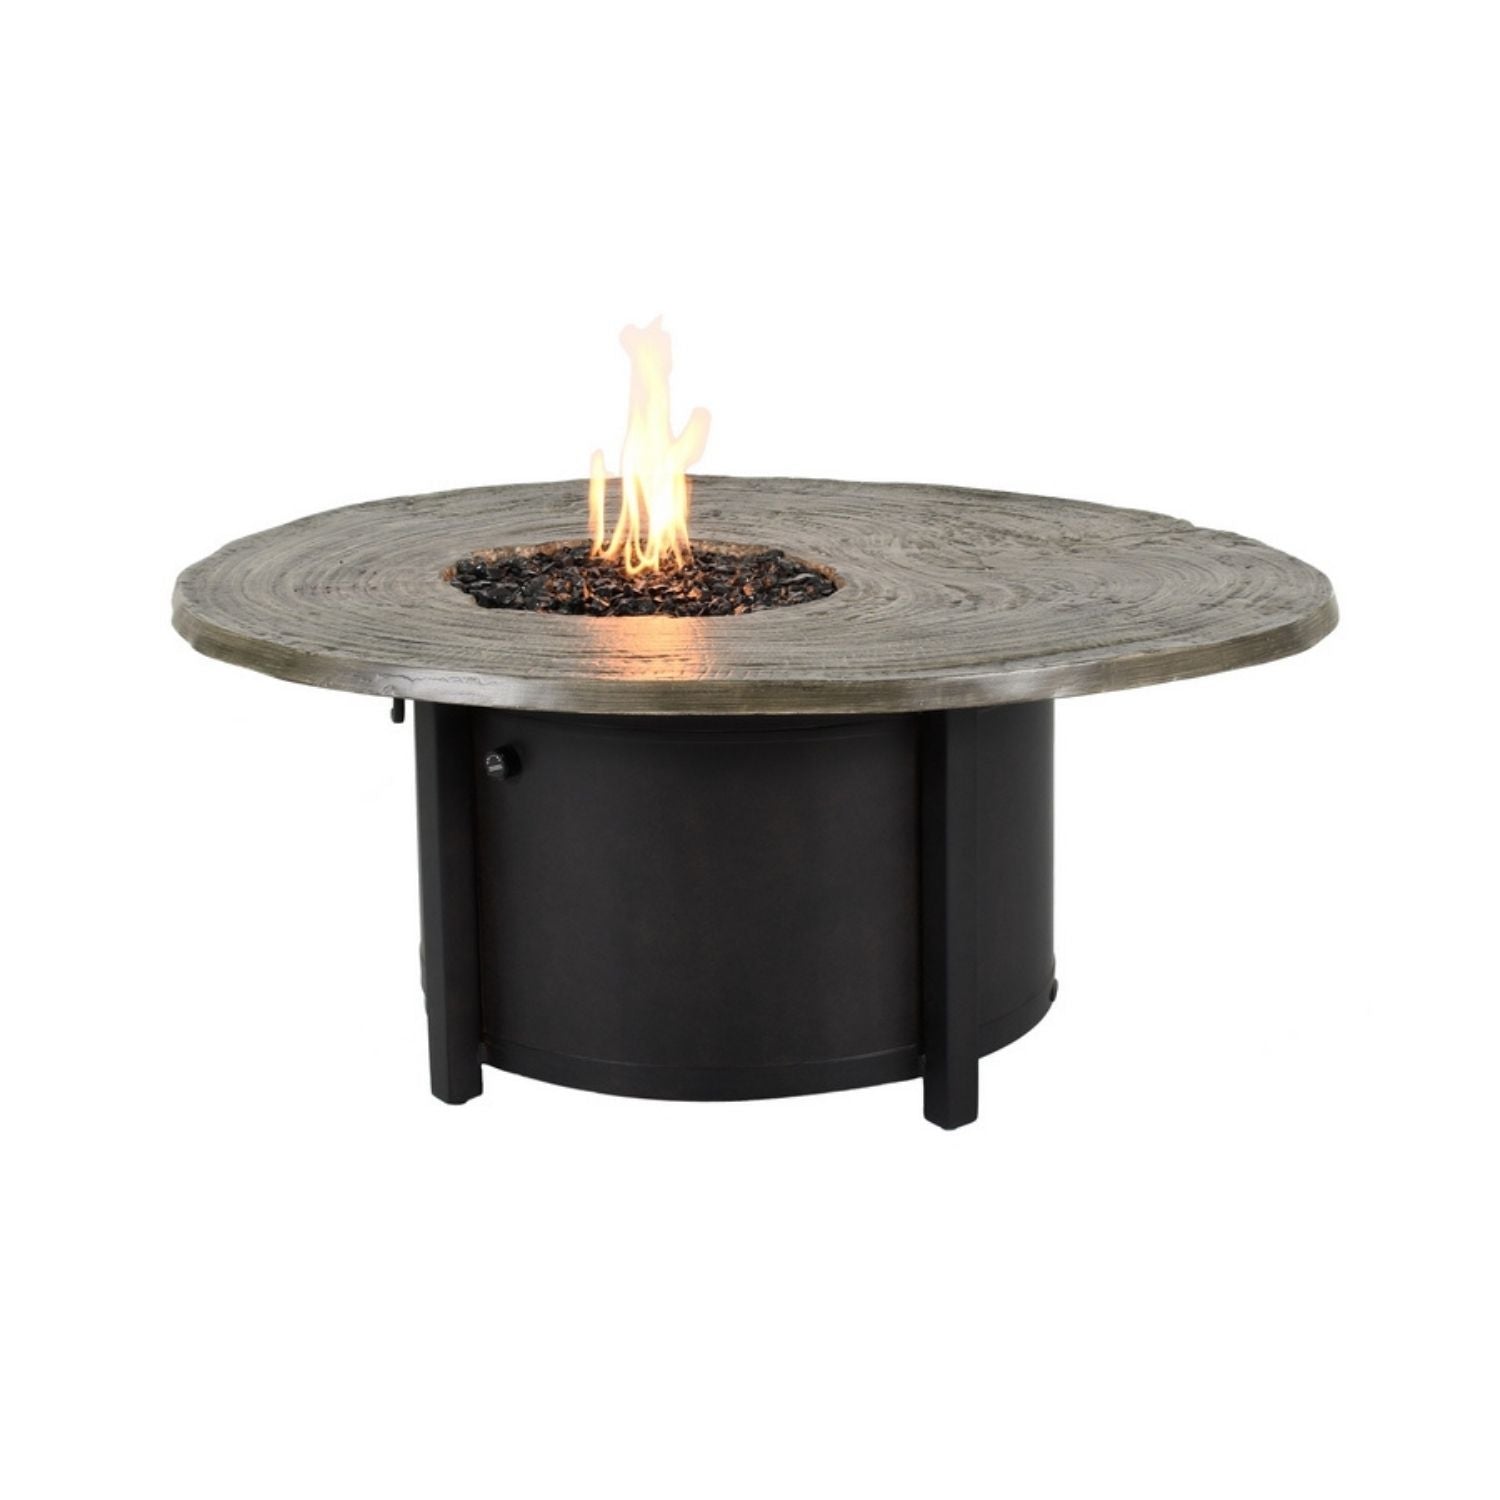 Outdoor fire feature for patio/outdoor room, Riviera Outdoor Decor, Corpus Christi